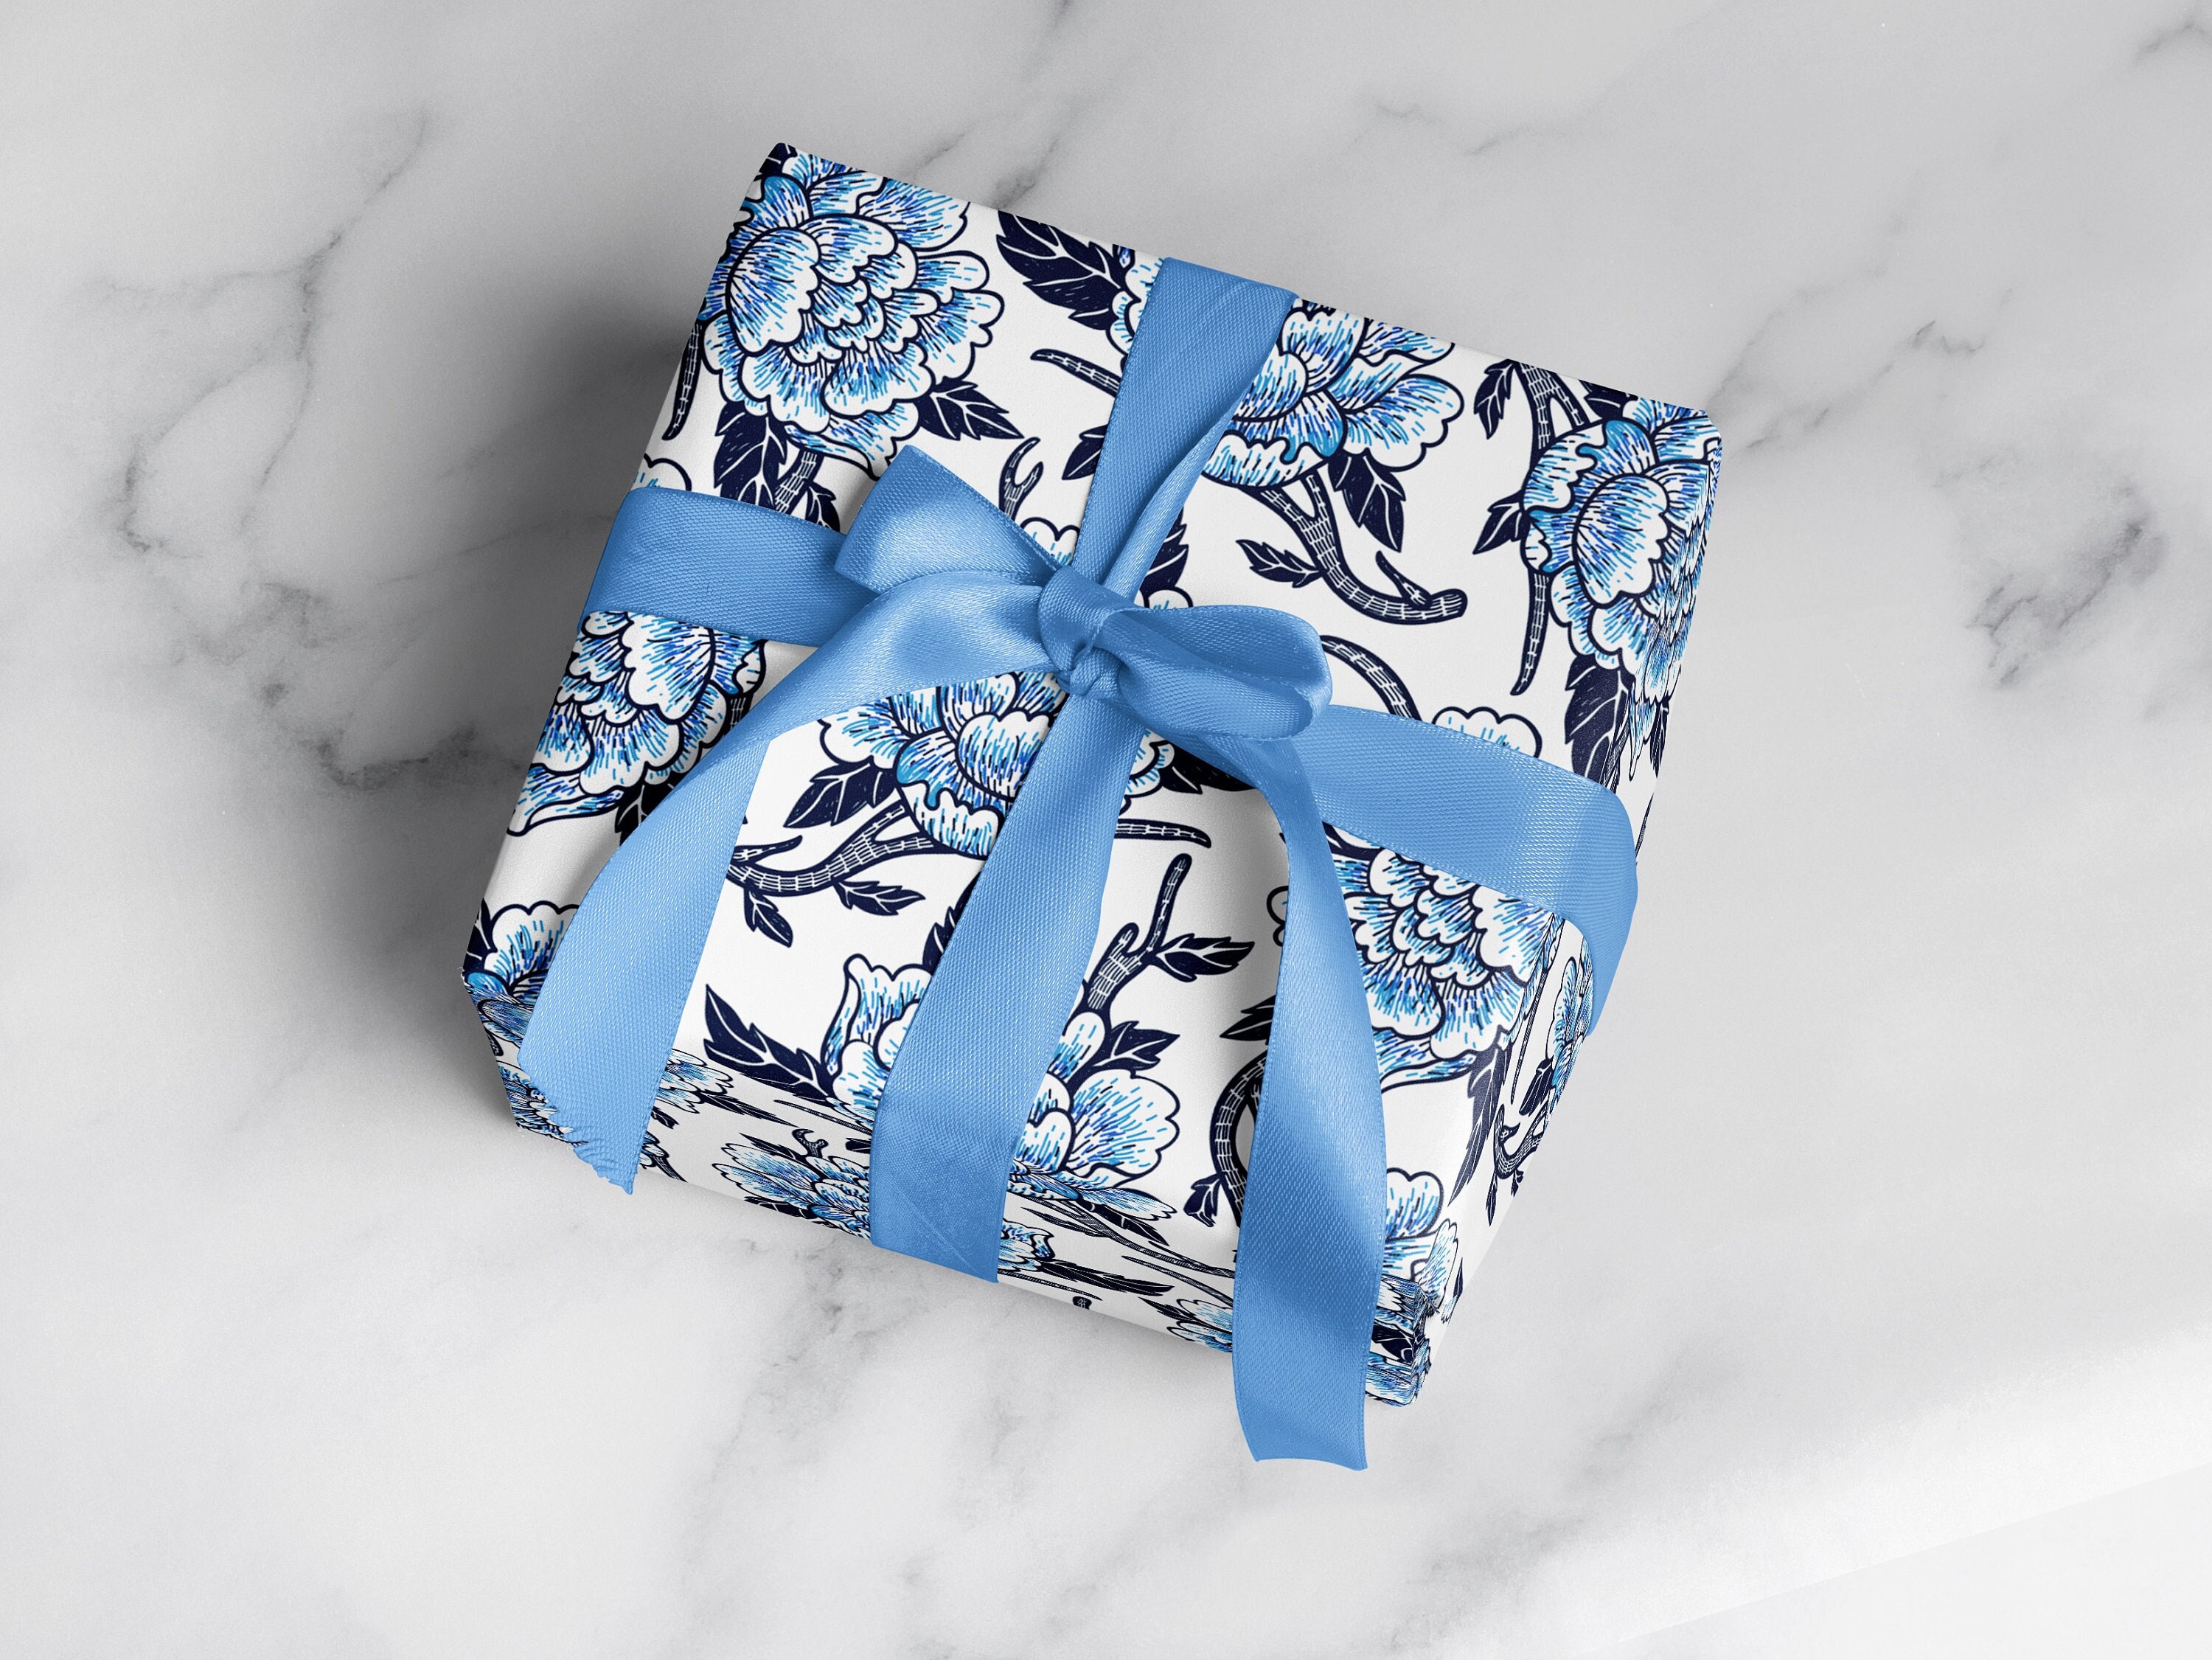 Preppy Blue And White Boy Baby Shower Wrapping Paper Sheets